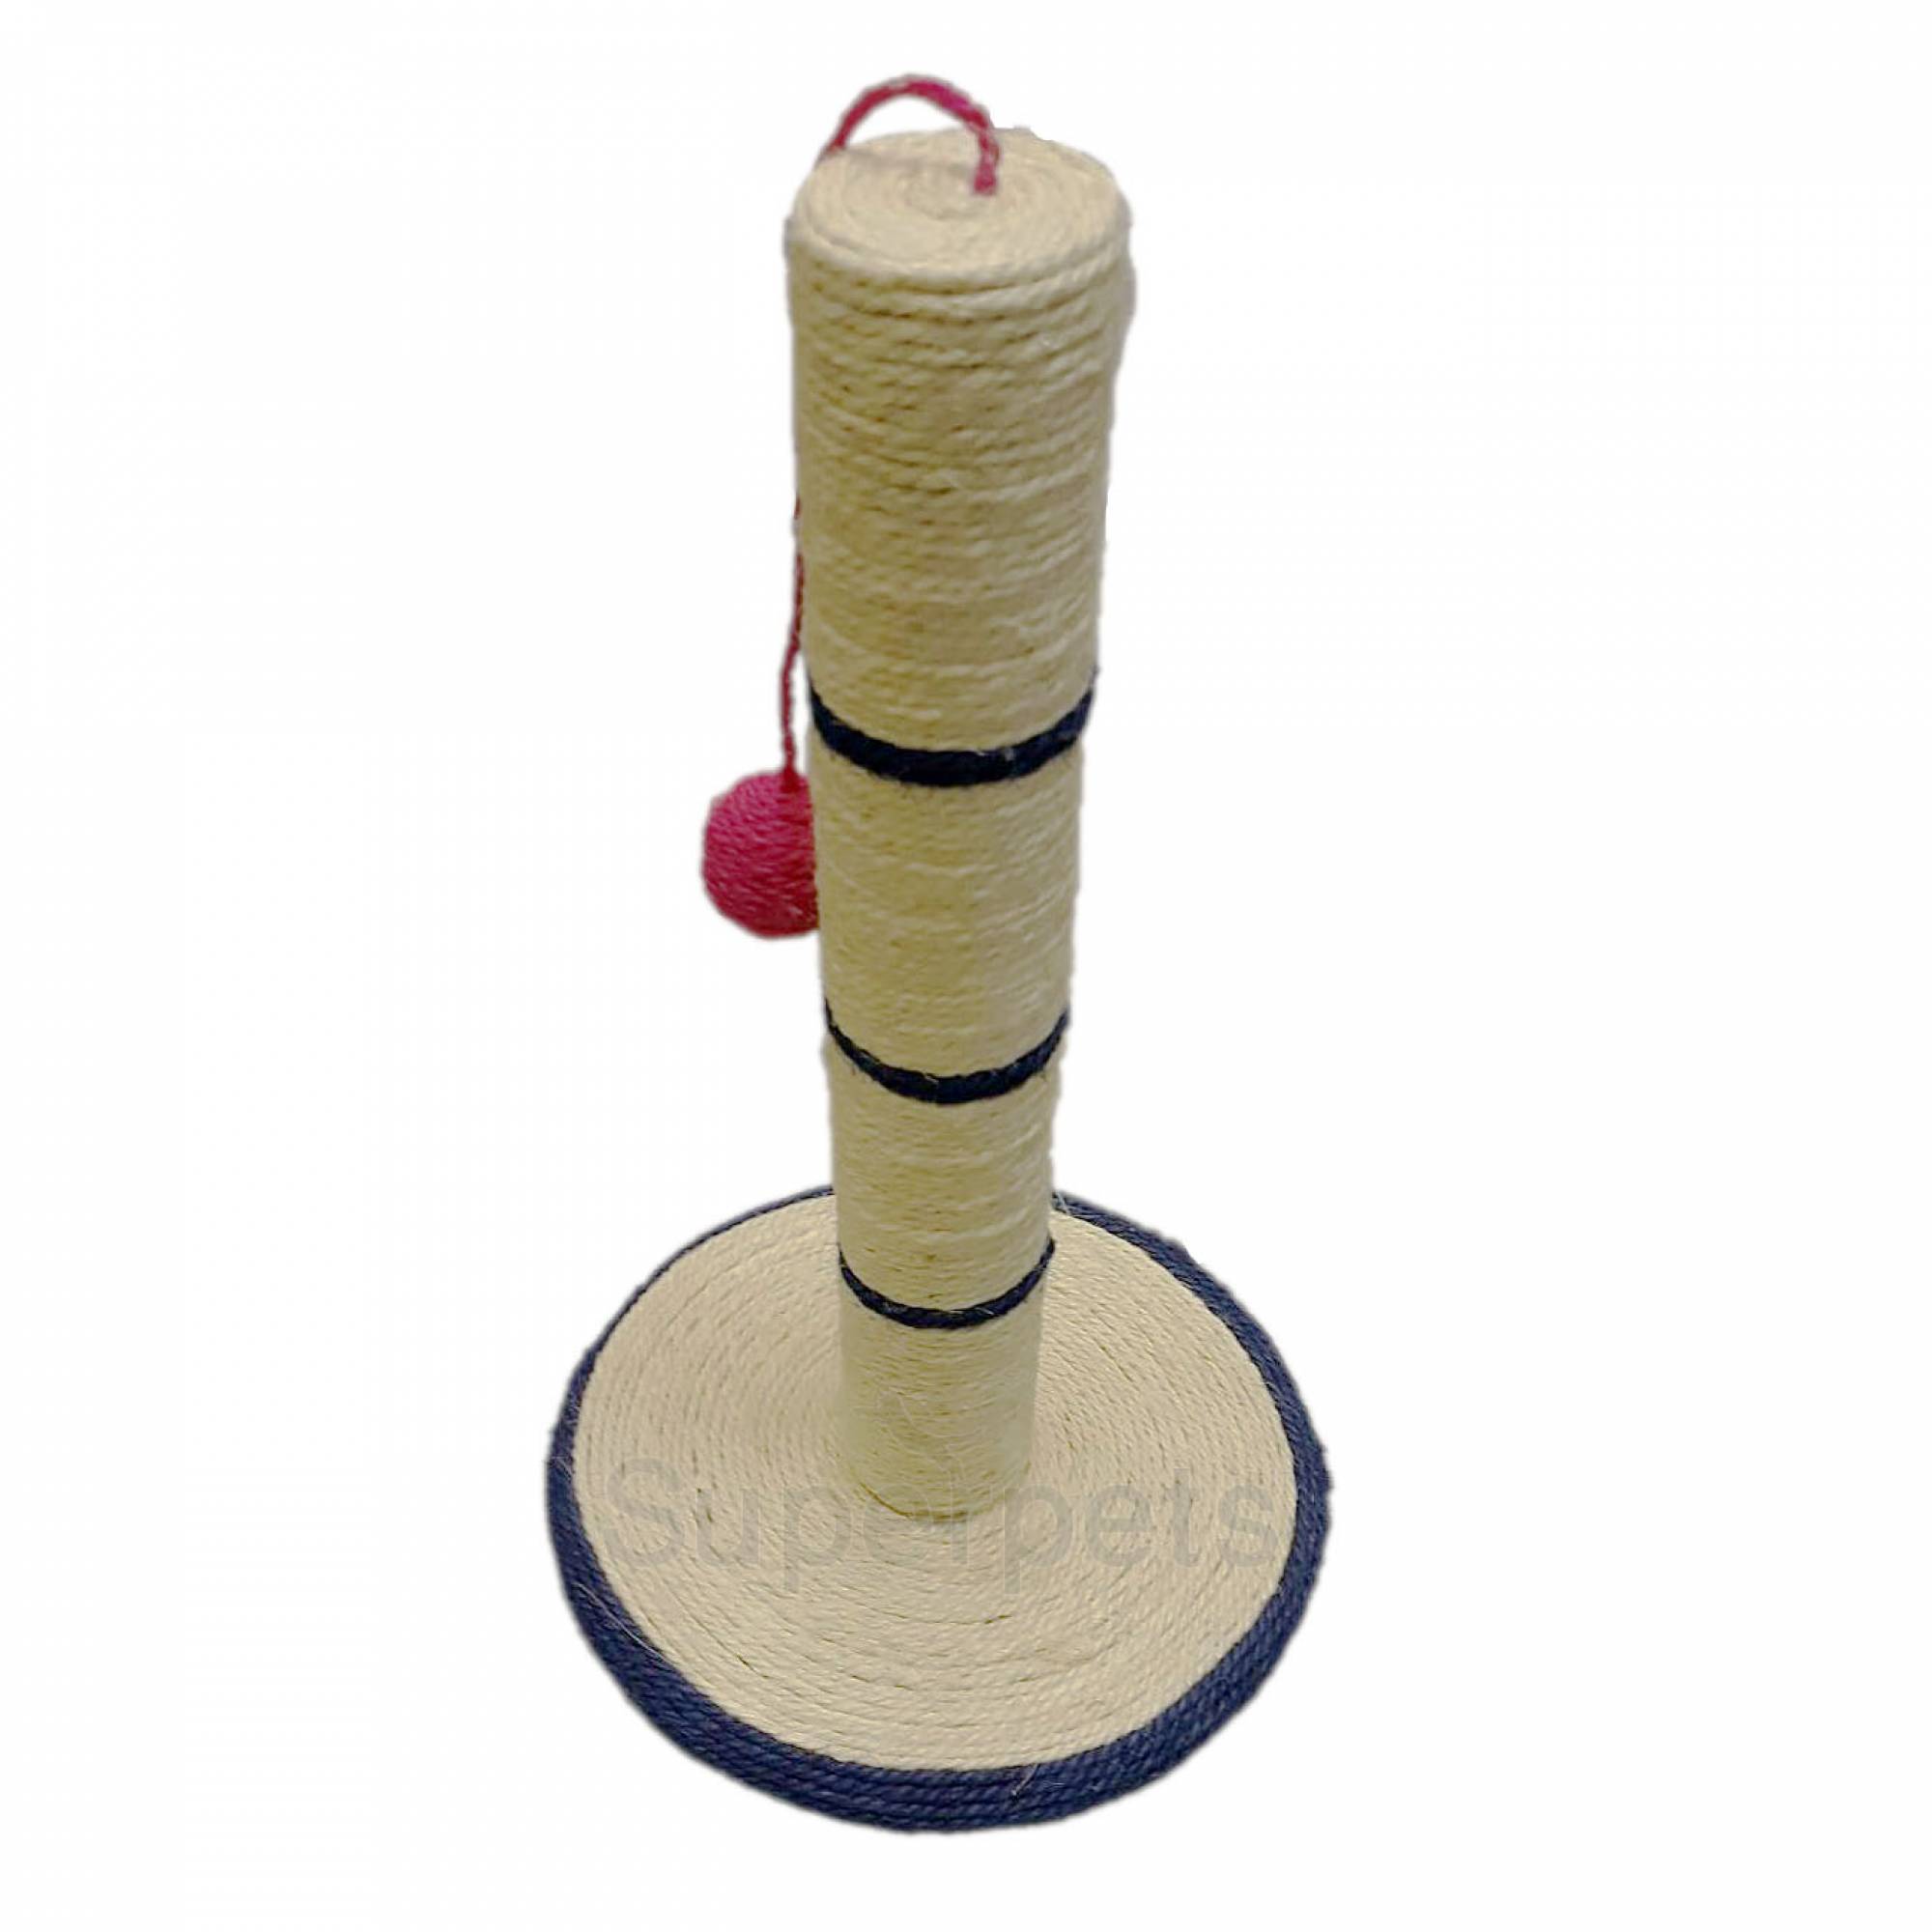 OPSP43597/1551 - Scratch Pole with Pink Ball